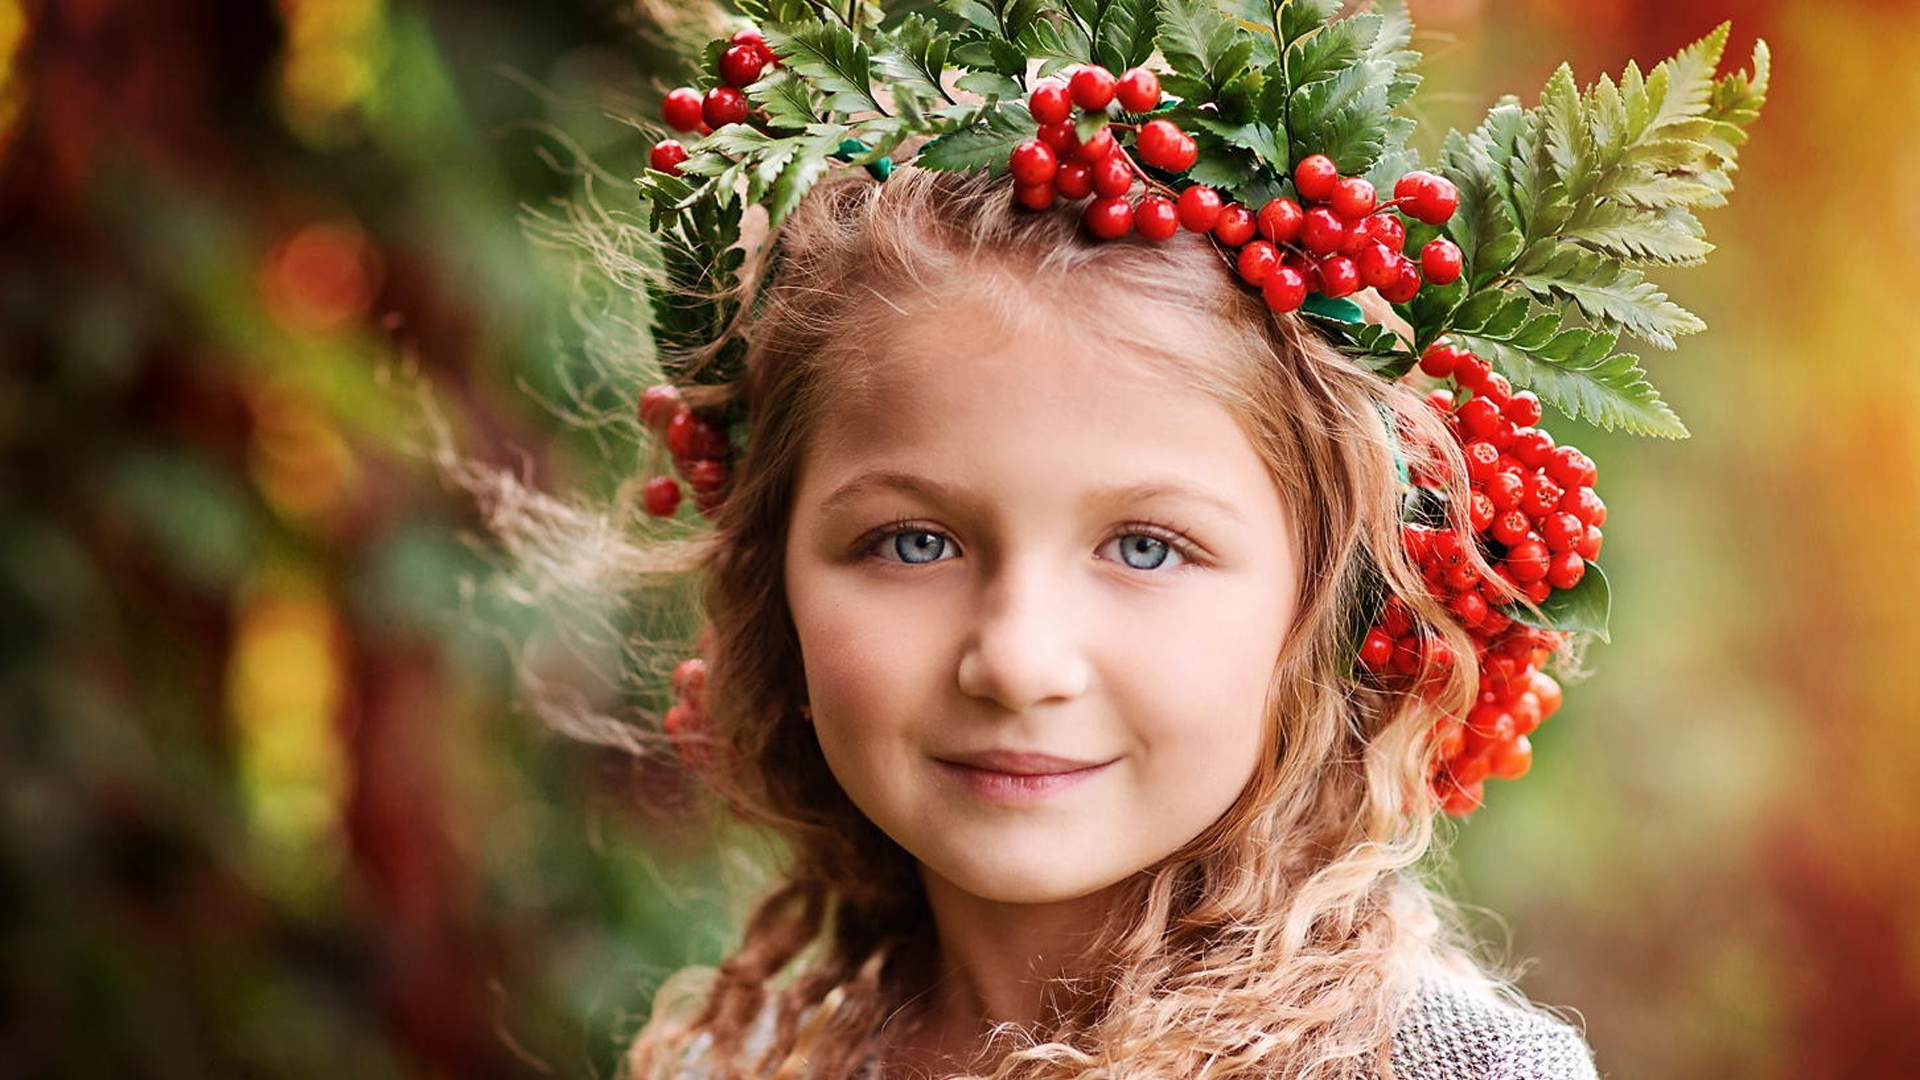 Grey Eyes Little Girl Is Having Red Cherries With Leaves On Head Standing In Colorful Wallpaper HD